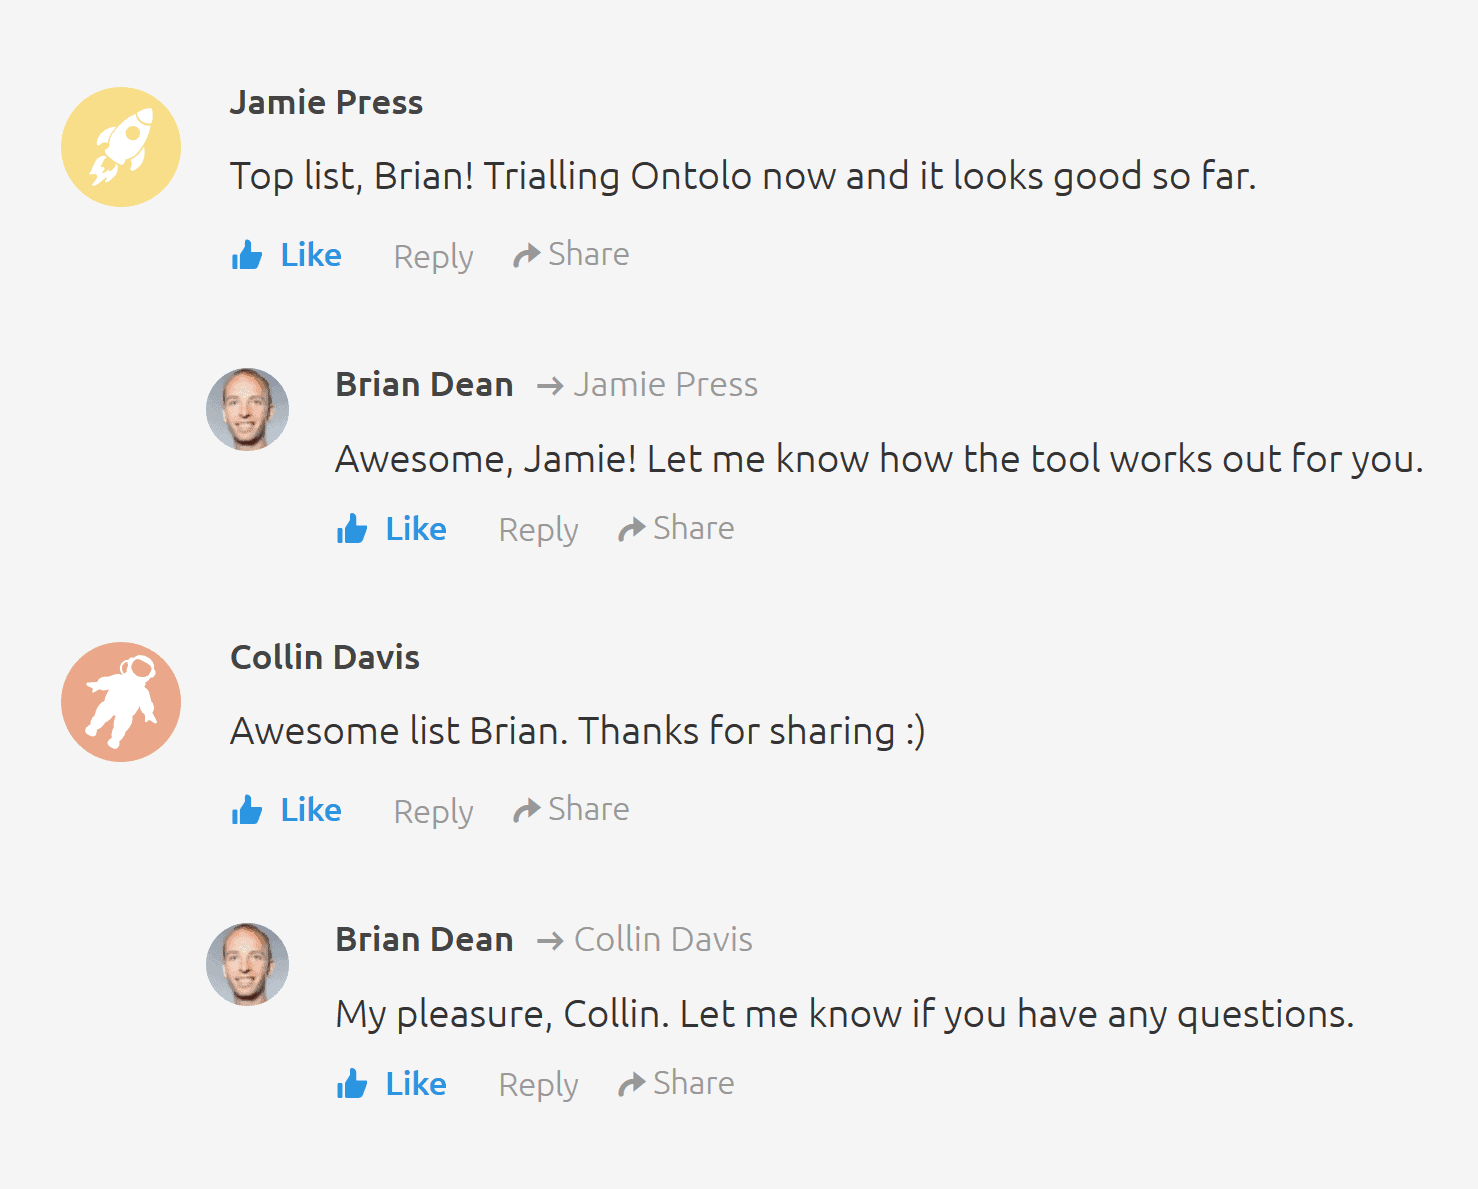 Comments on a guest post